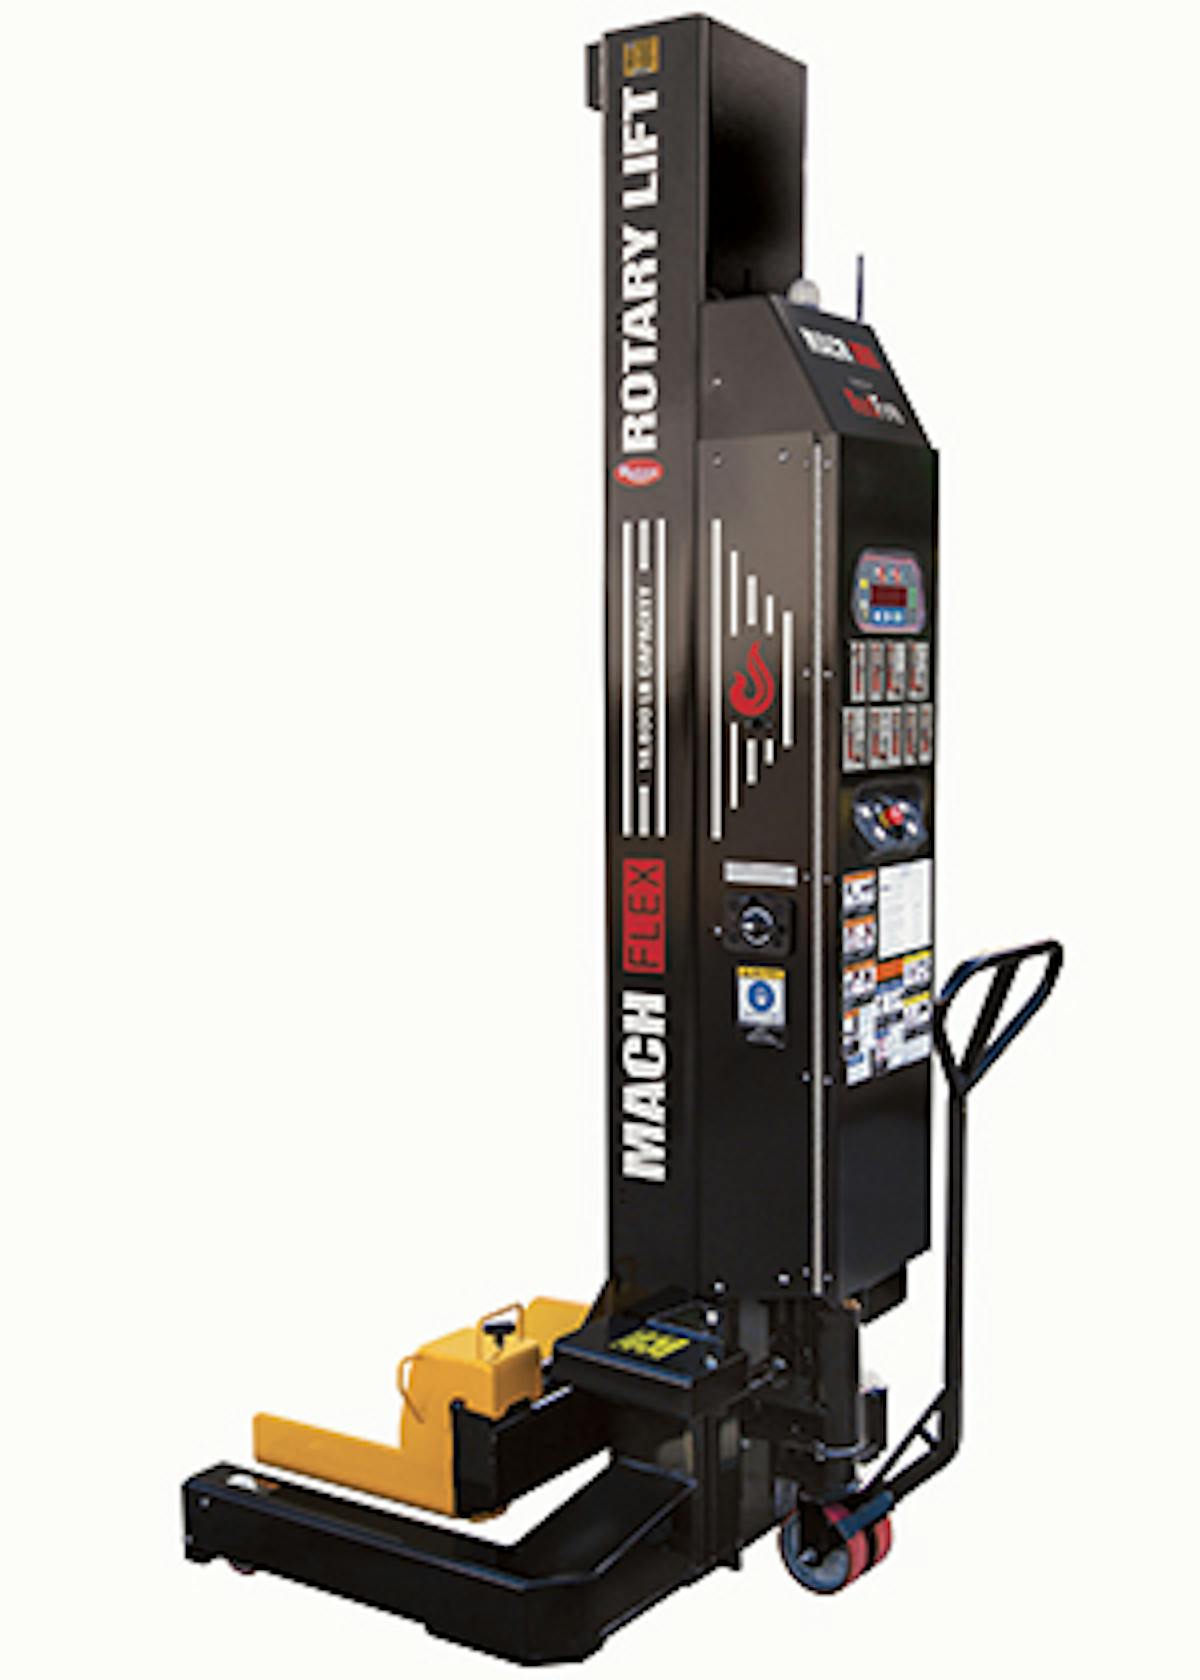 Rotary Lift introduces remote-controlled wireless mobile column lift